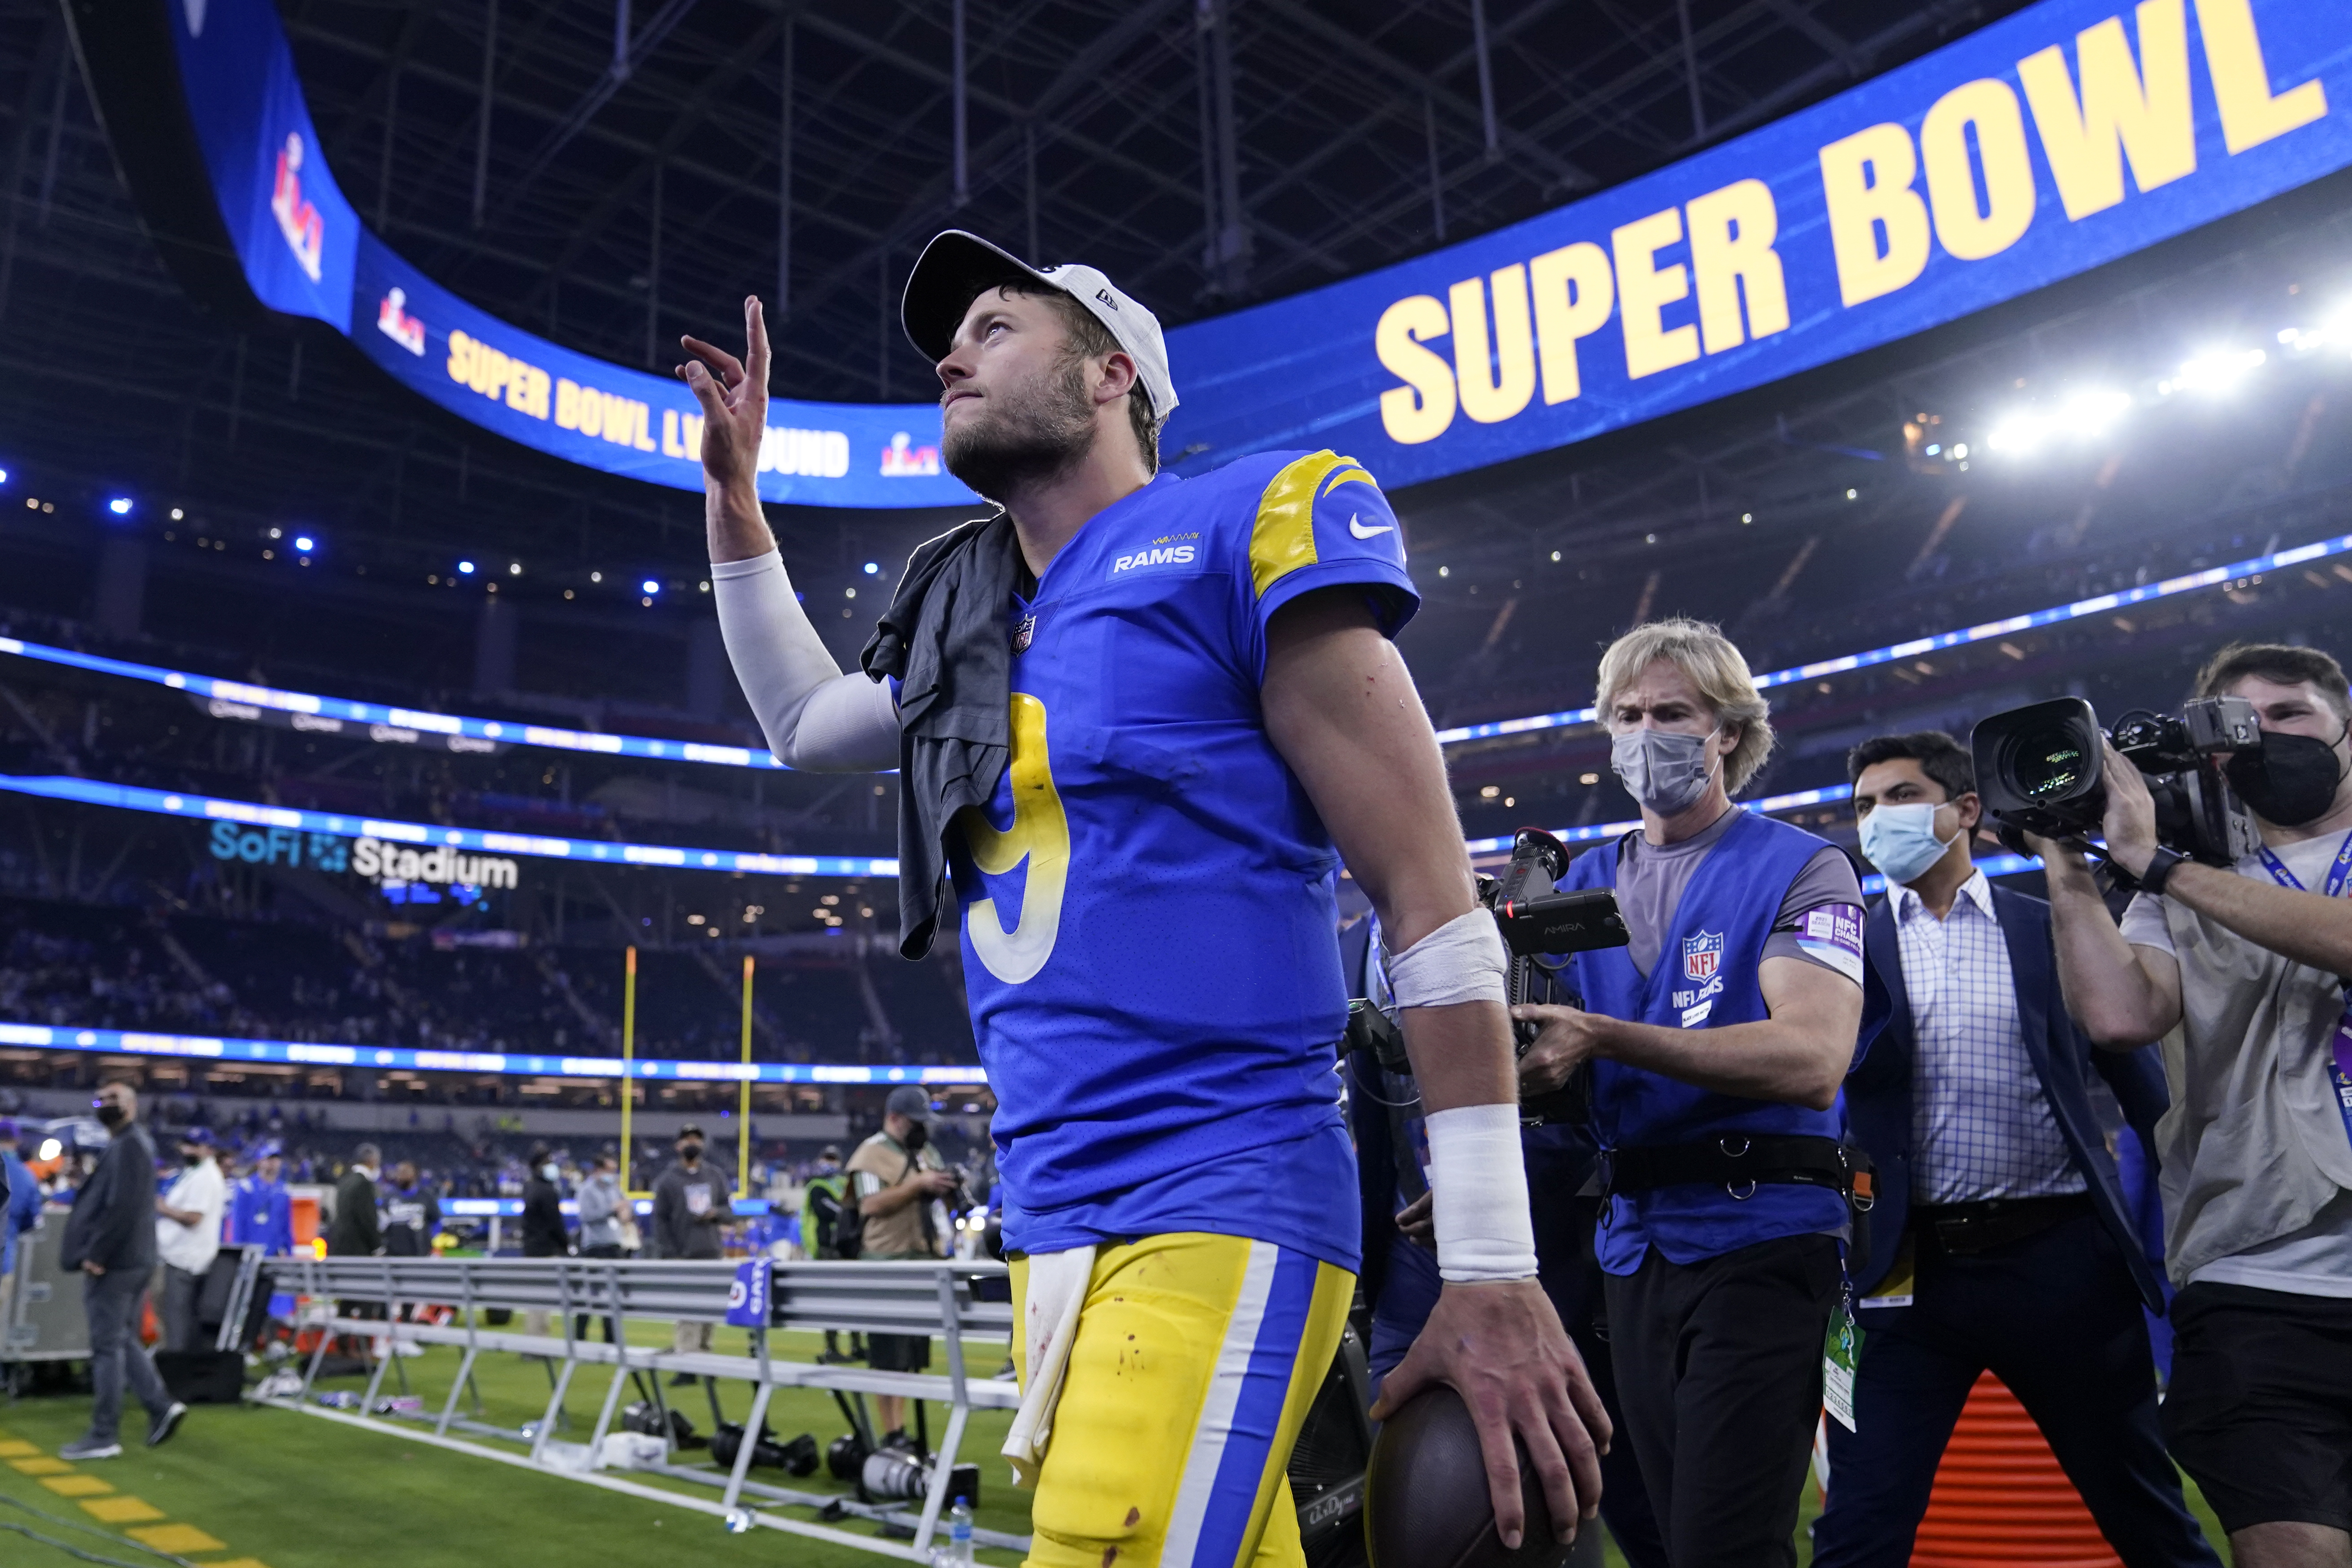 5 Super Bowl prop bets that can turn $100 into $500 or more 